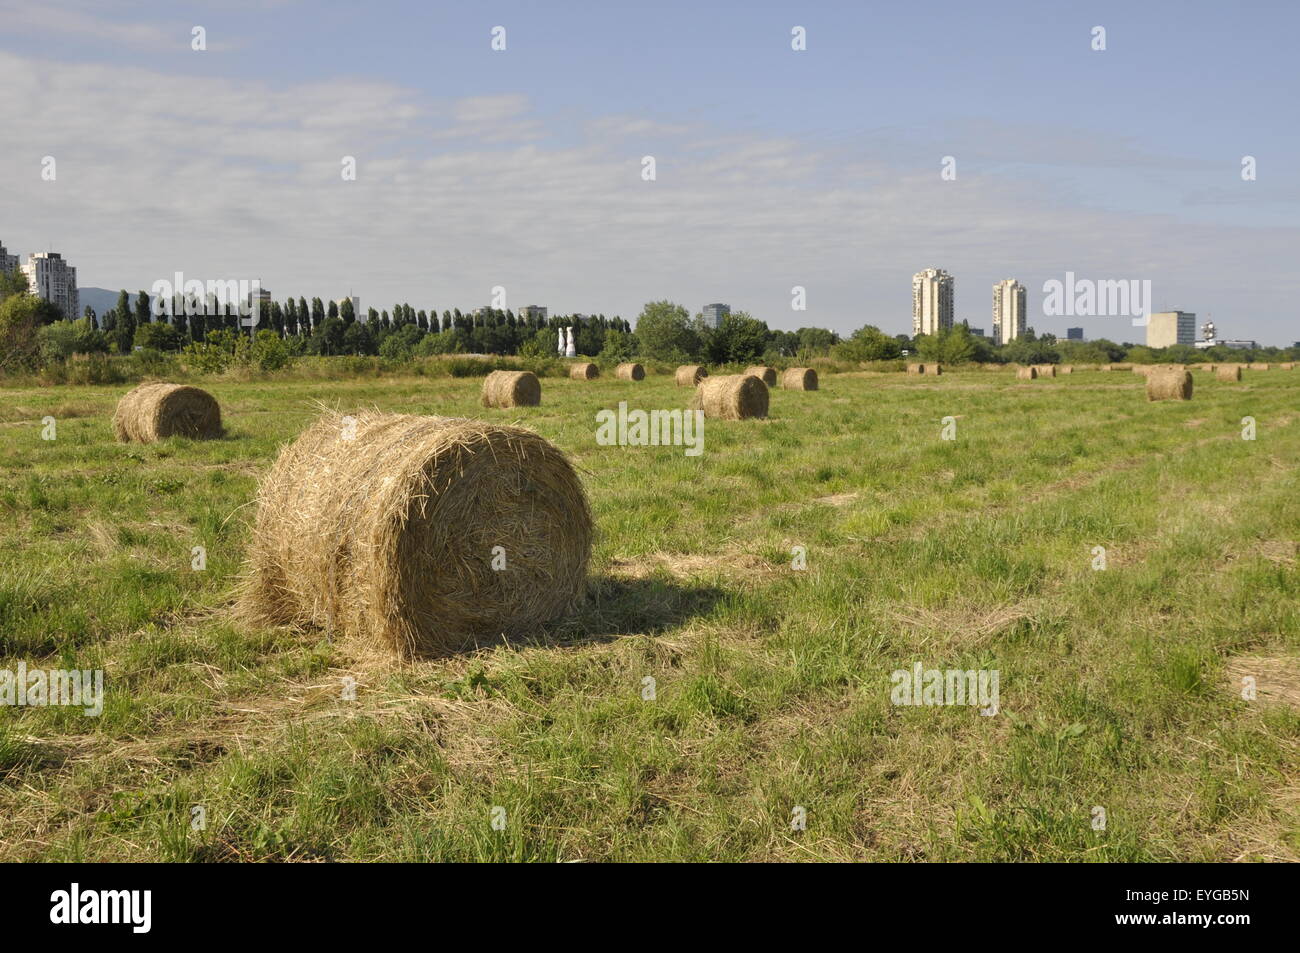 Large round grass hay bales In Zagreb Stock Photo